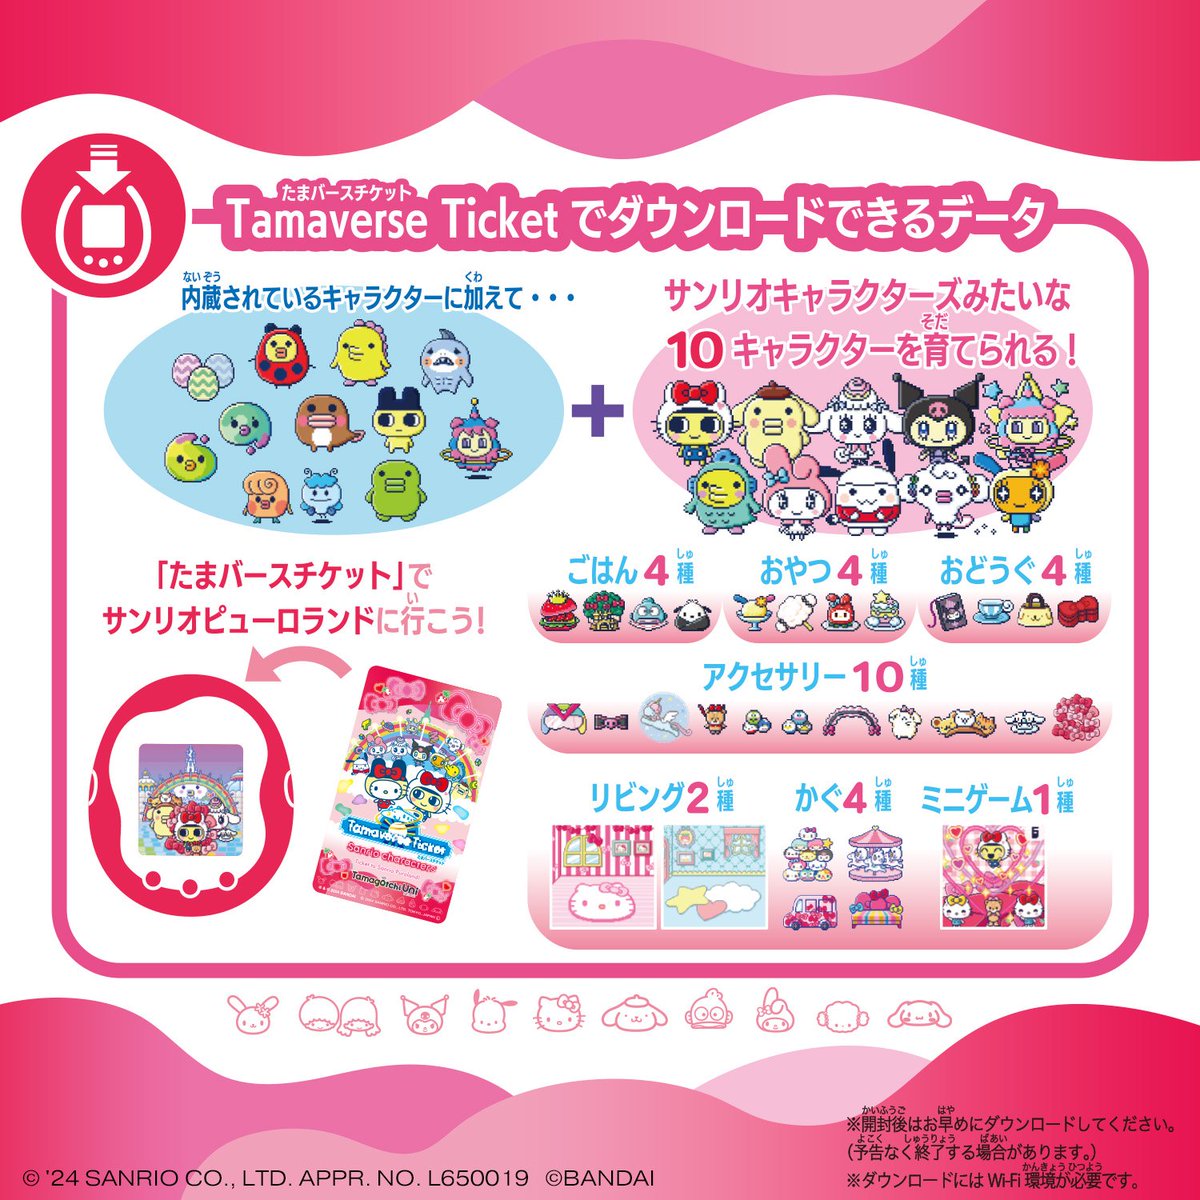 The Sanrio Characters Tamaverse ticket, which comes with the new Uni model but can be purchased for use with older models, has access to 10 characters, 10 accessories and other goods!